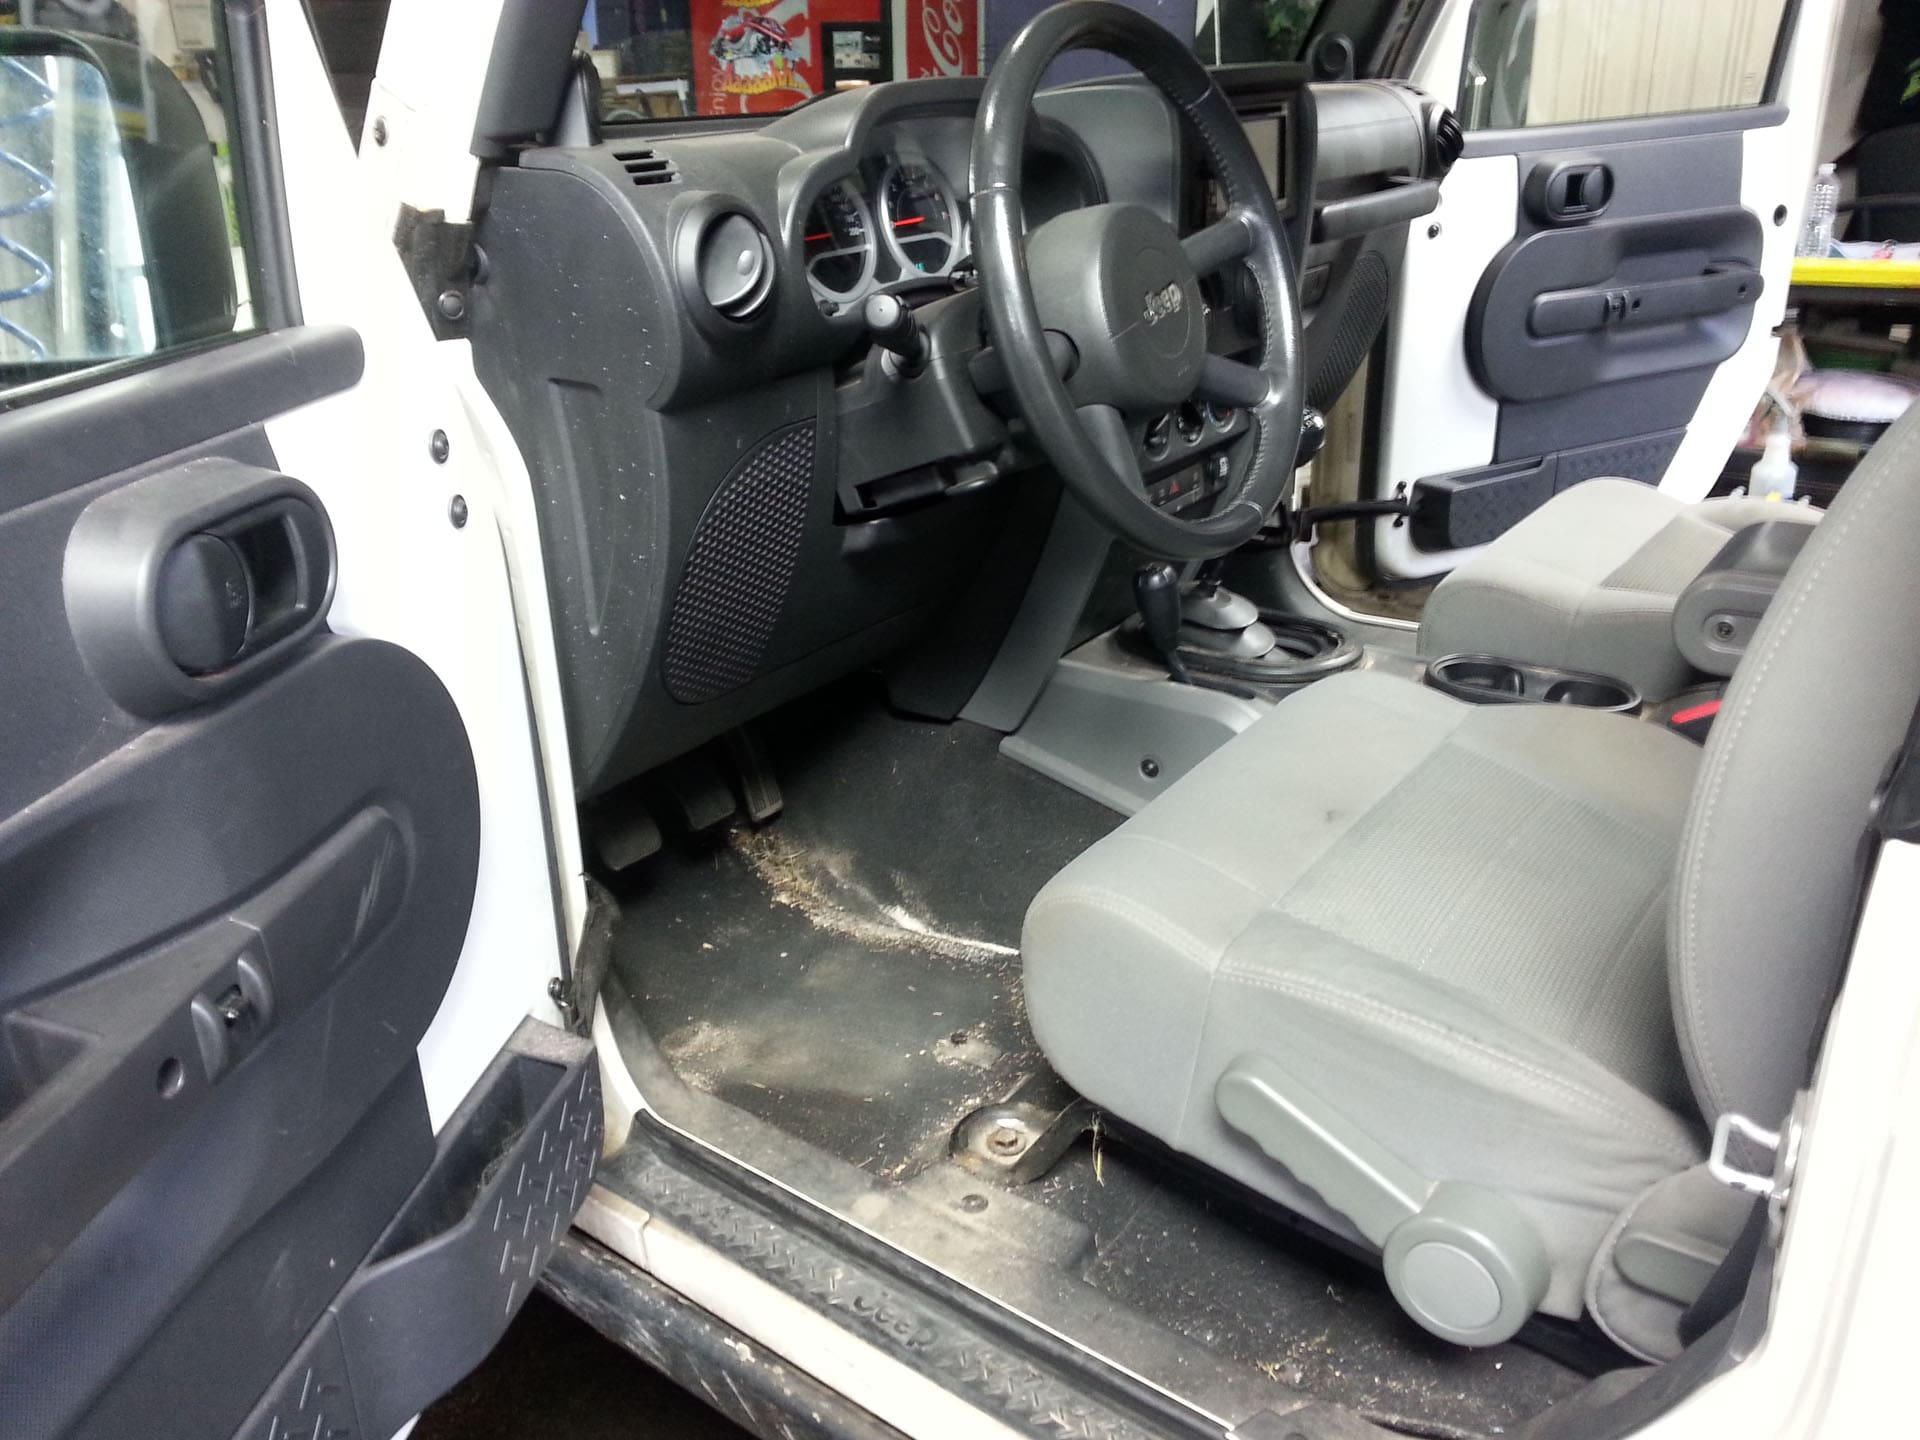 Jeep Interior Detailing: Before